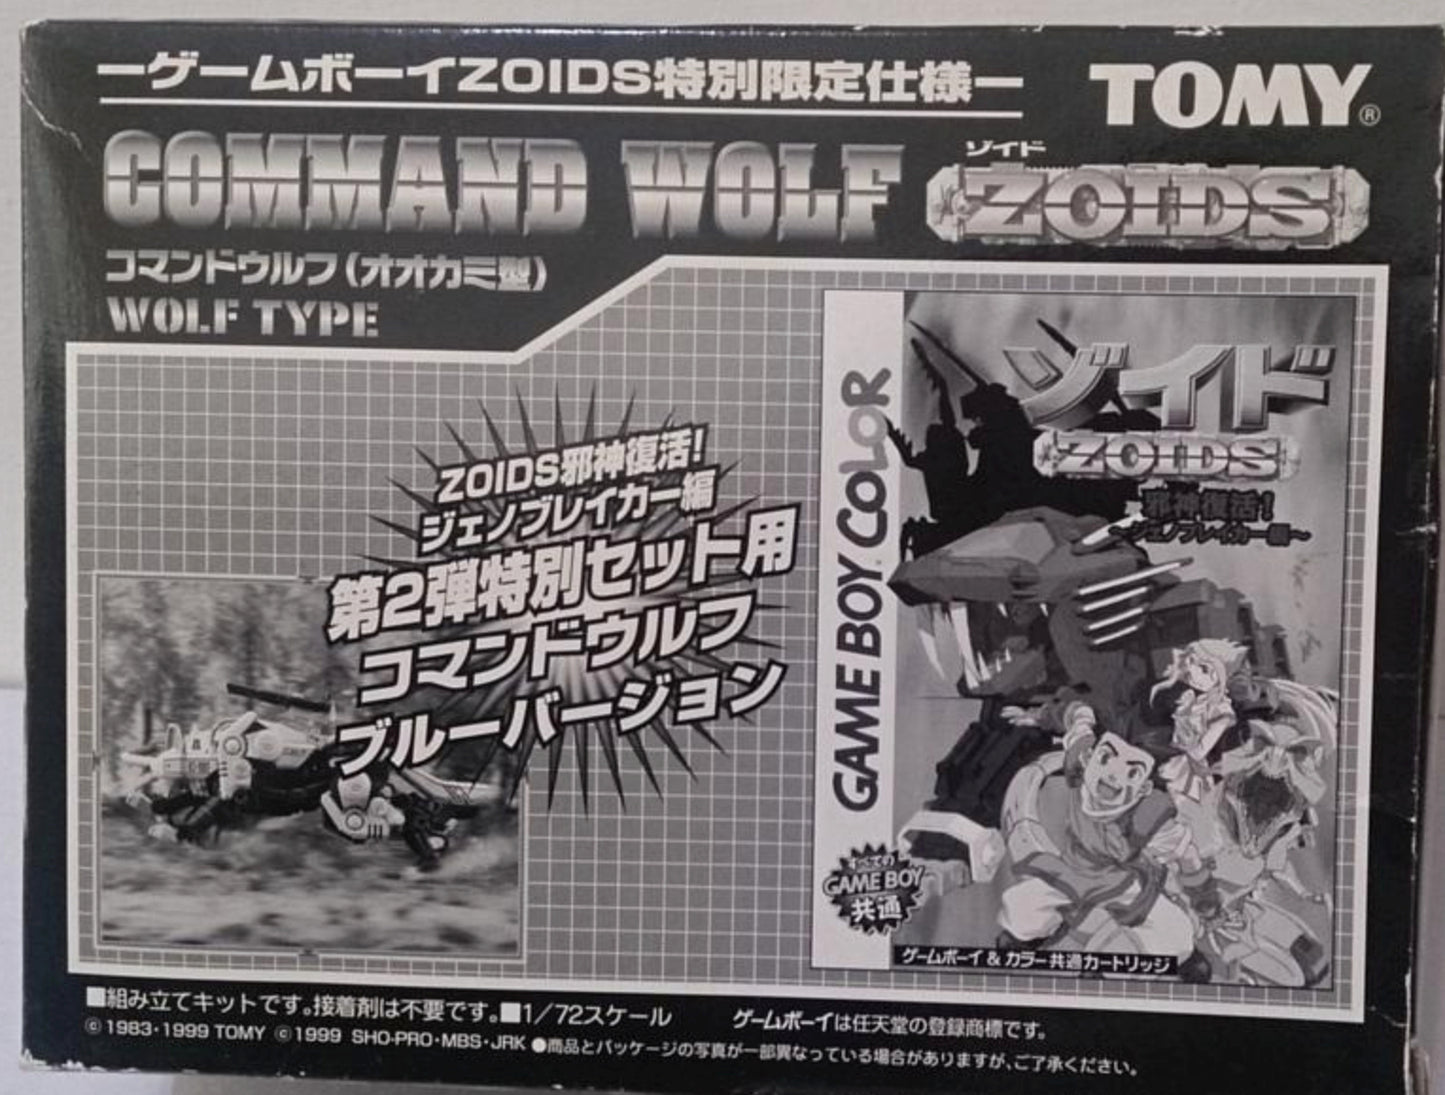 Tomy Zoids 1/72 Command Wolf Type GBA Game Boy Color Limited Model Kit Figure